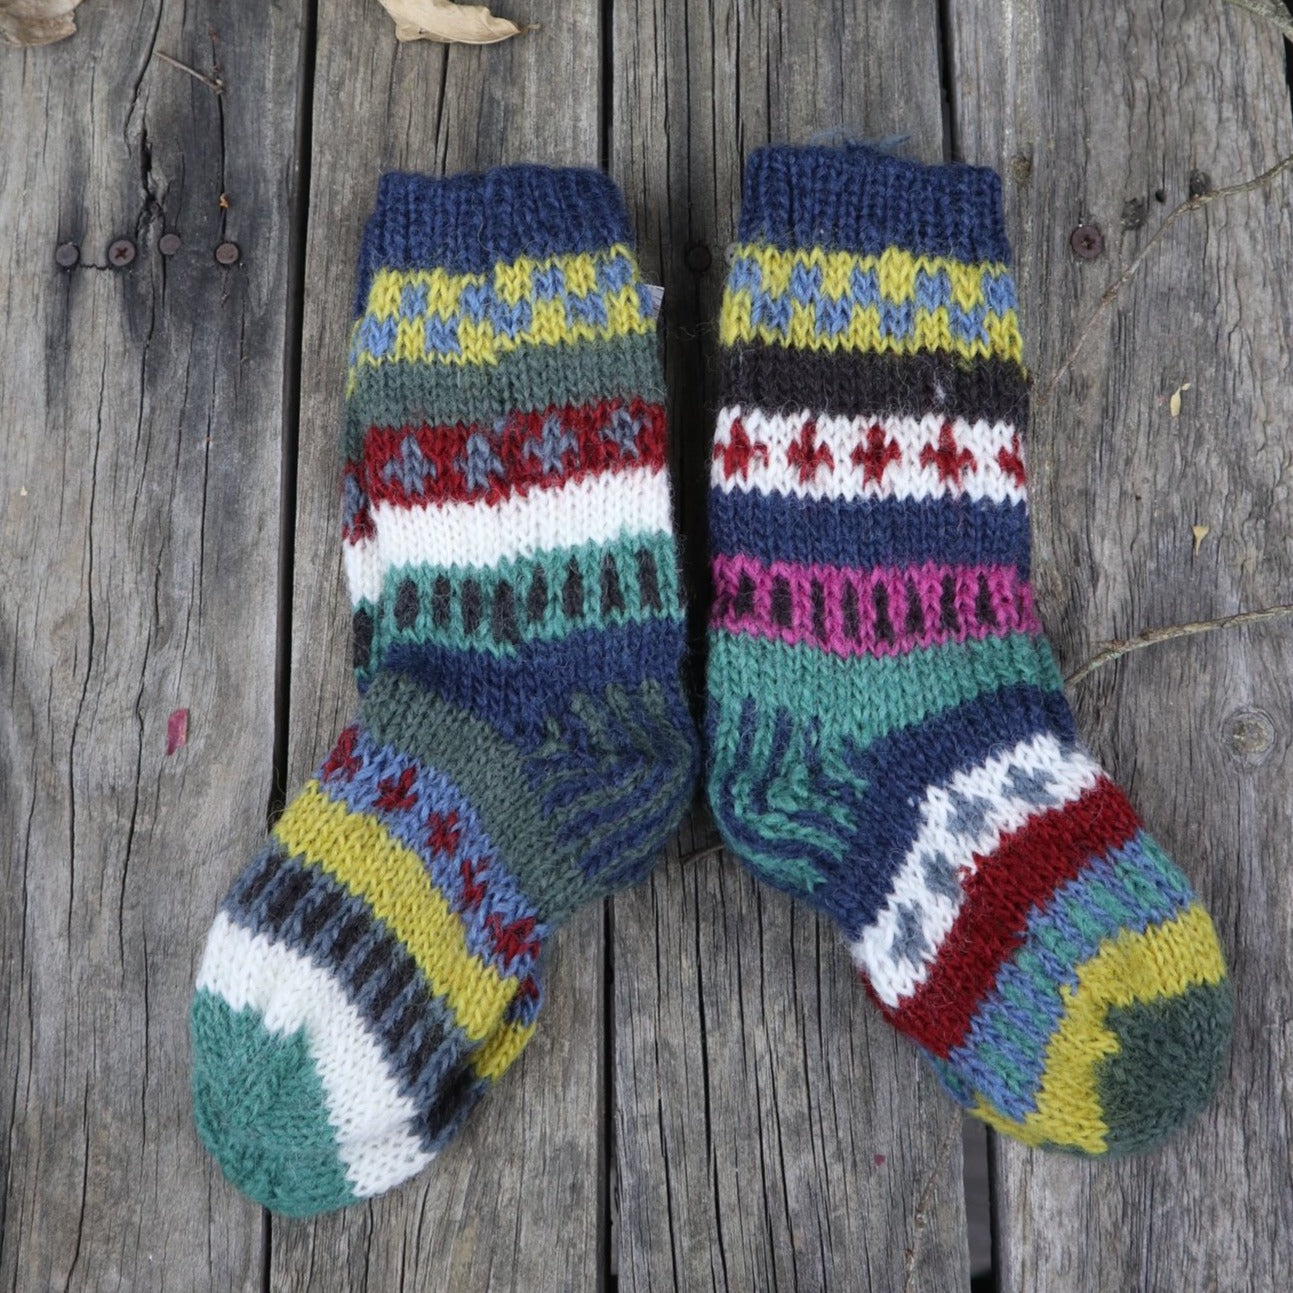 Fair Trade Ethical Children's Patterned Woollen Socks in Green, Brown and Red